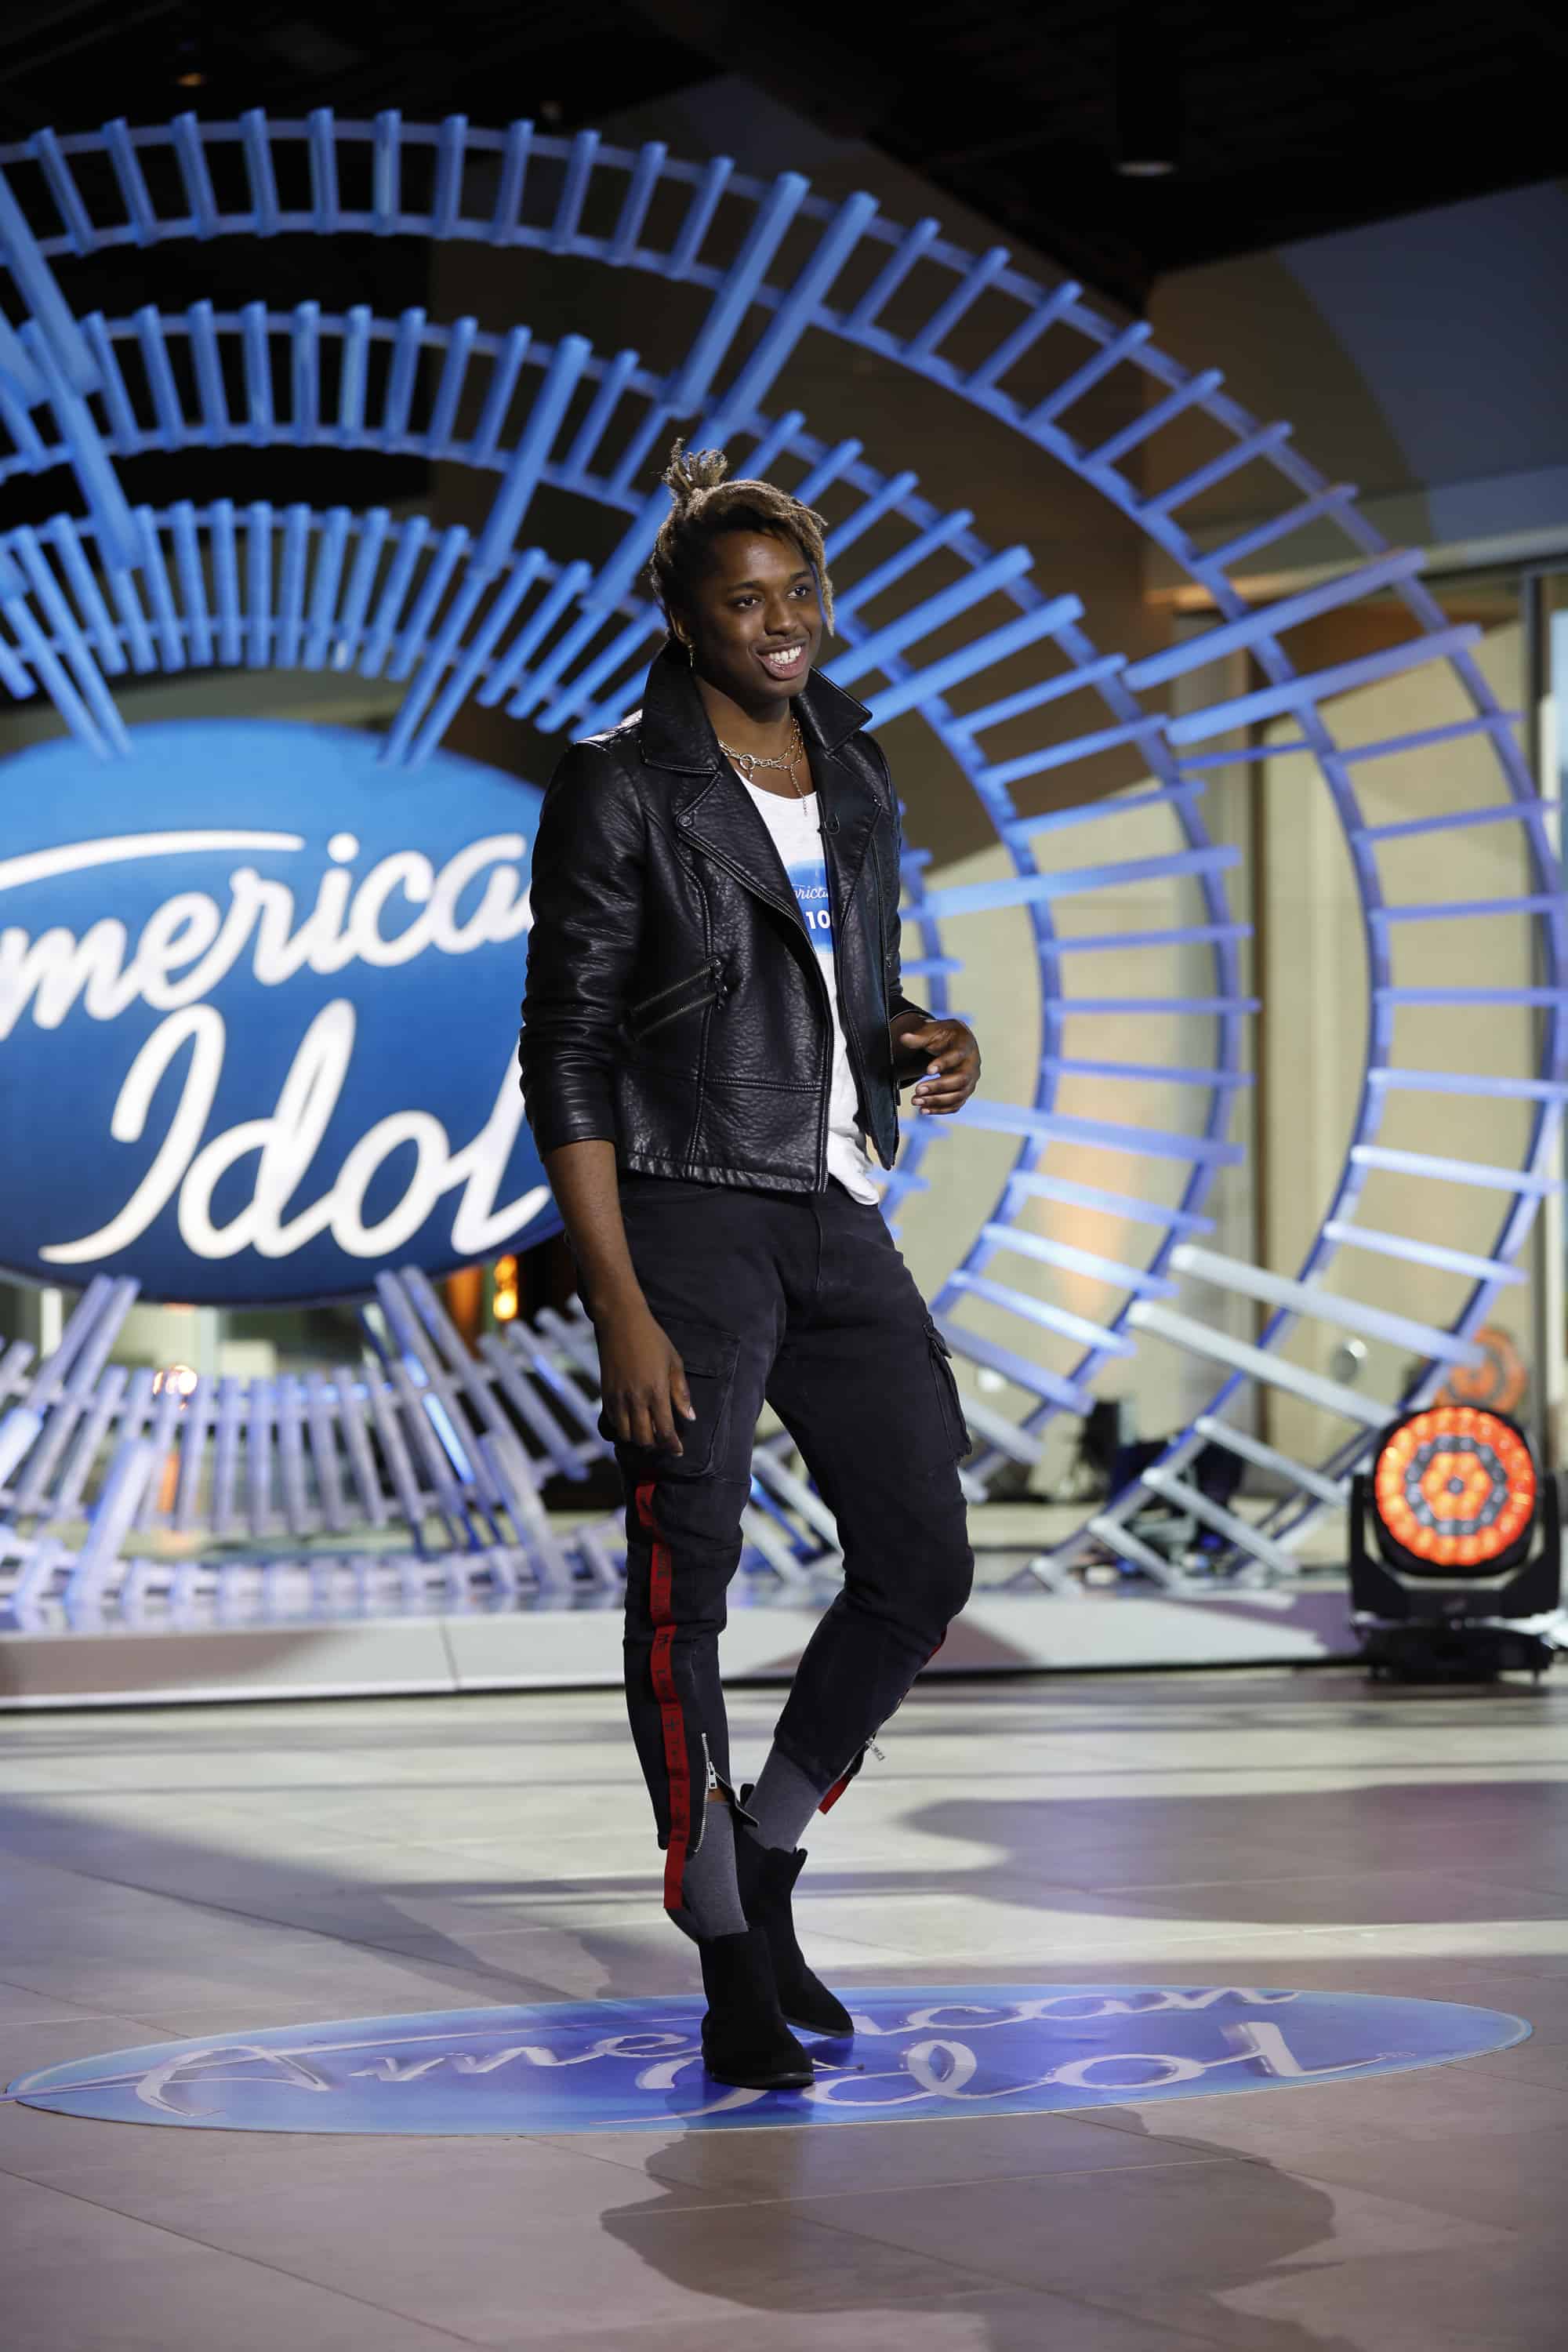 American Idol 2019 Premiere Spoilers: Photo Gallery and VIDEO.